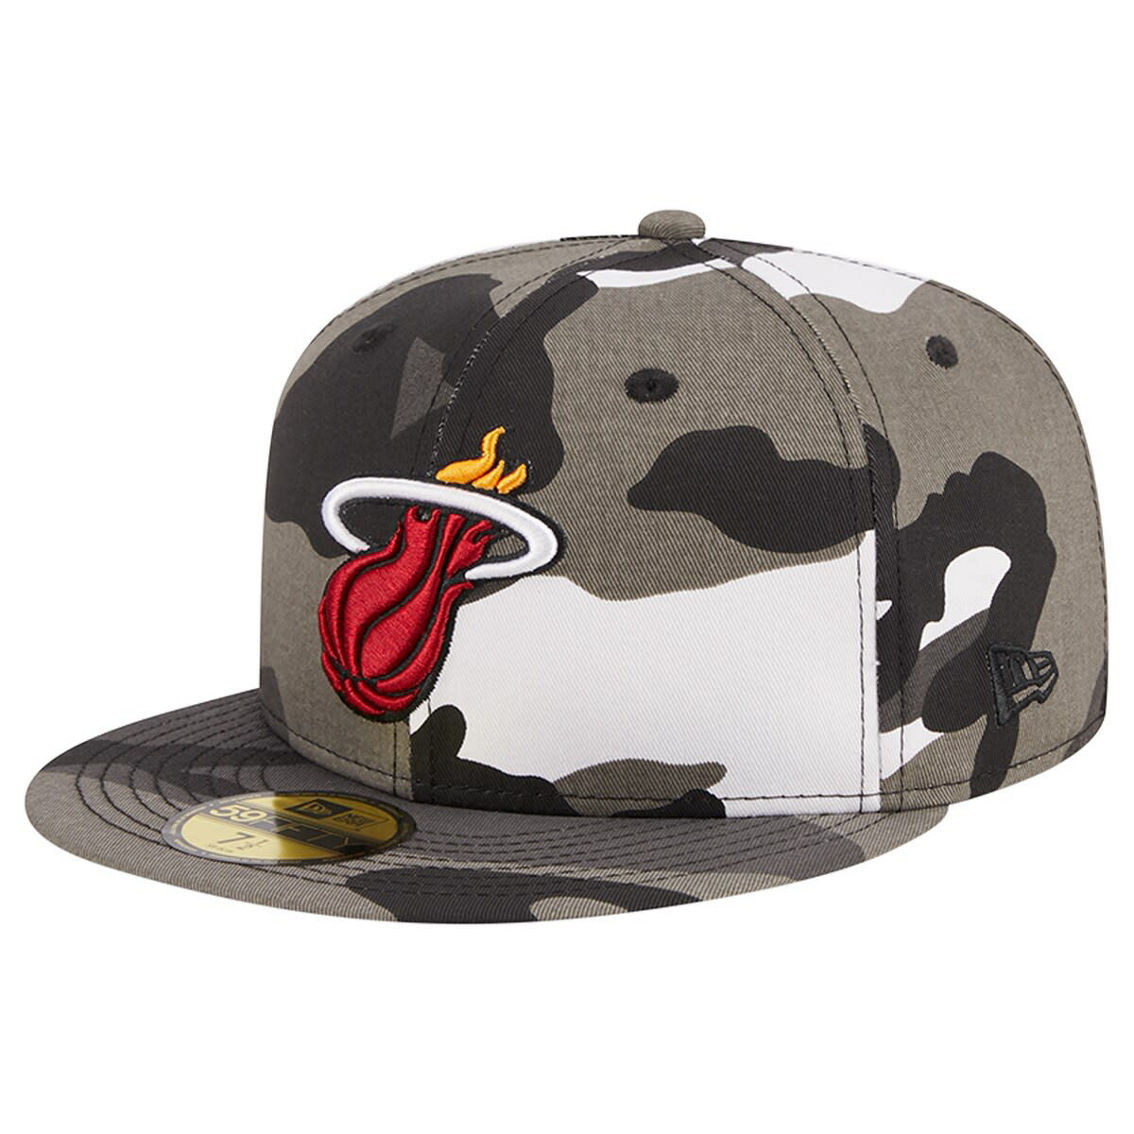 New Era Men's Miami Heat Snow Camo 59FIFTY Fitted Hat - Image 2 of 4